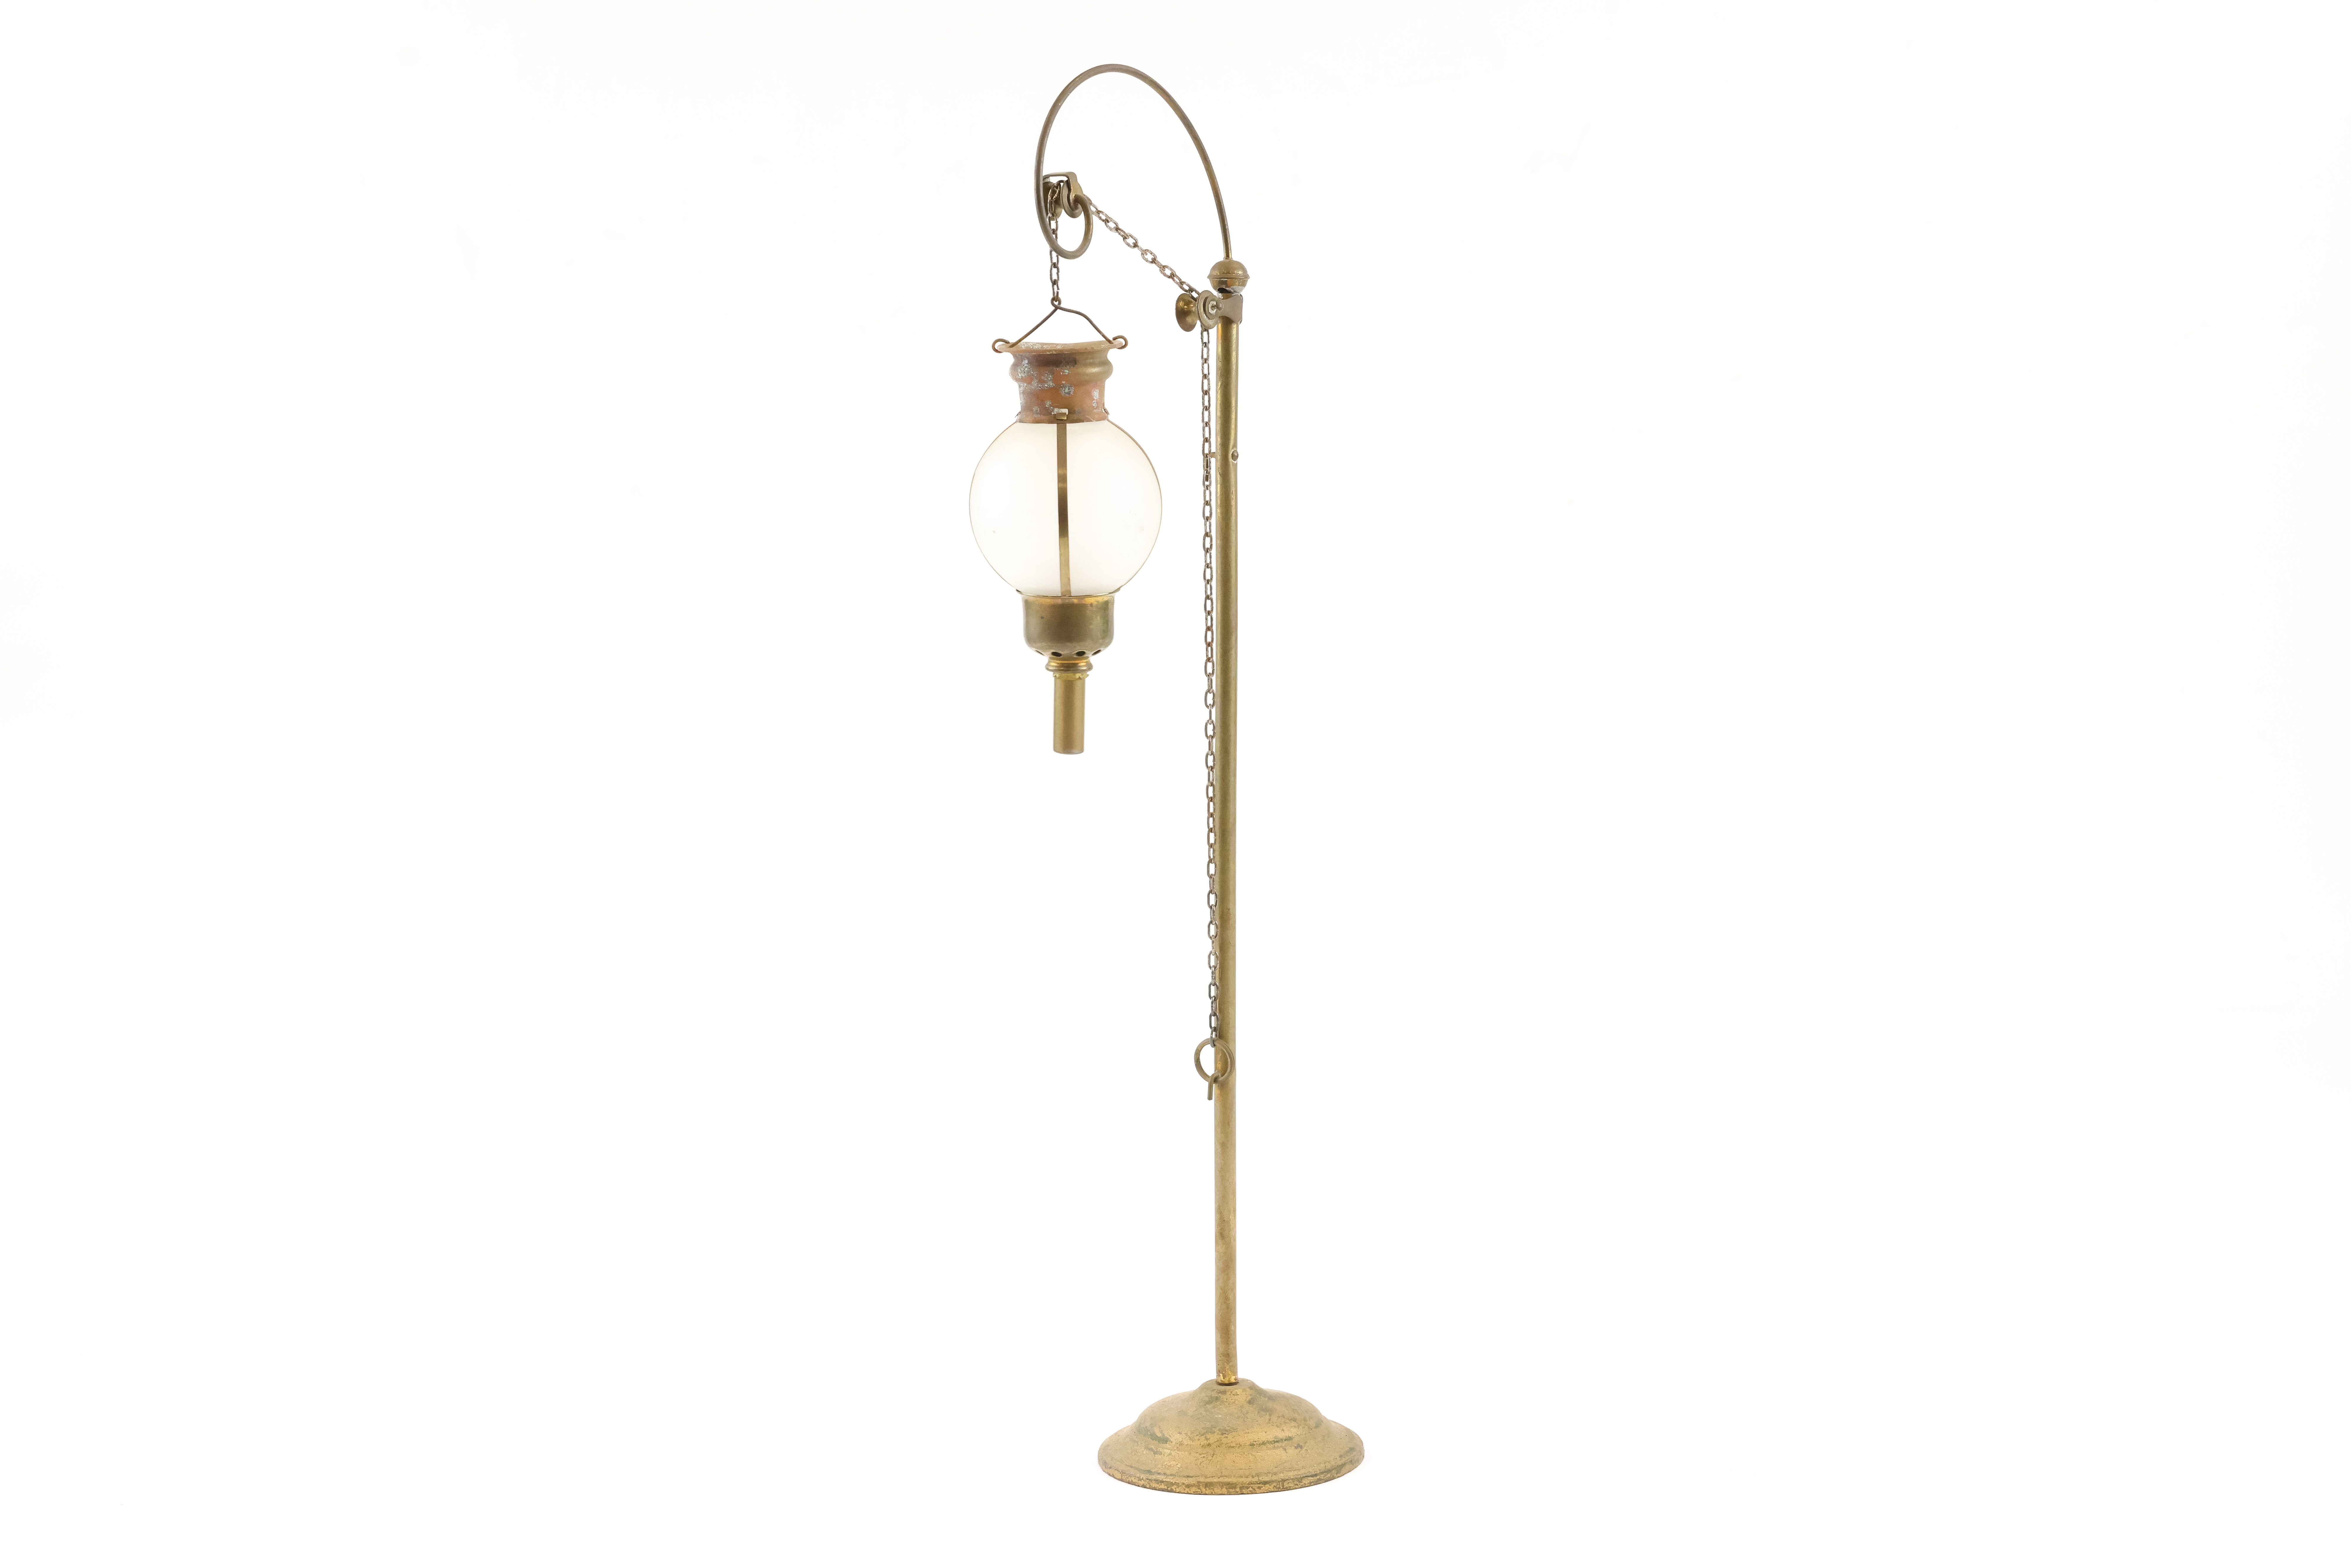 Marklin very early cast metal & Tinplate street lamp post. Its finished in gold with gold circular